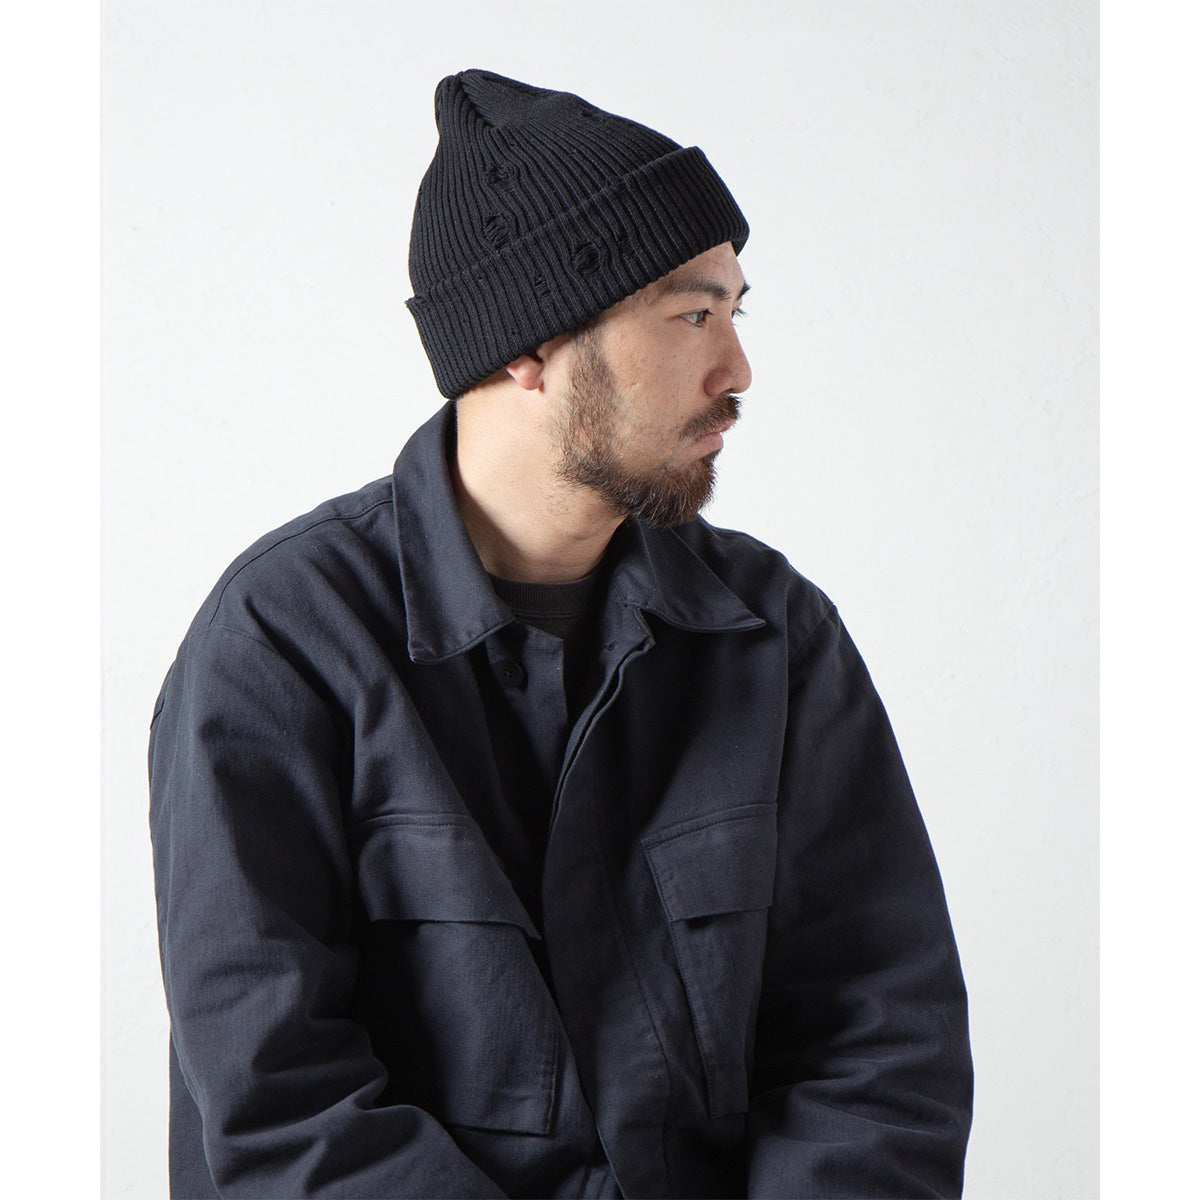 Racal Ripped Cotton Knit Watch Cap, Black